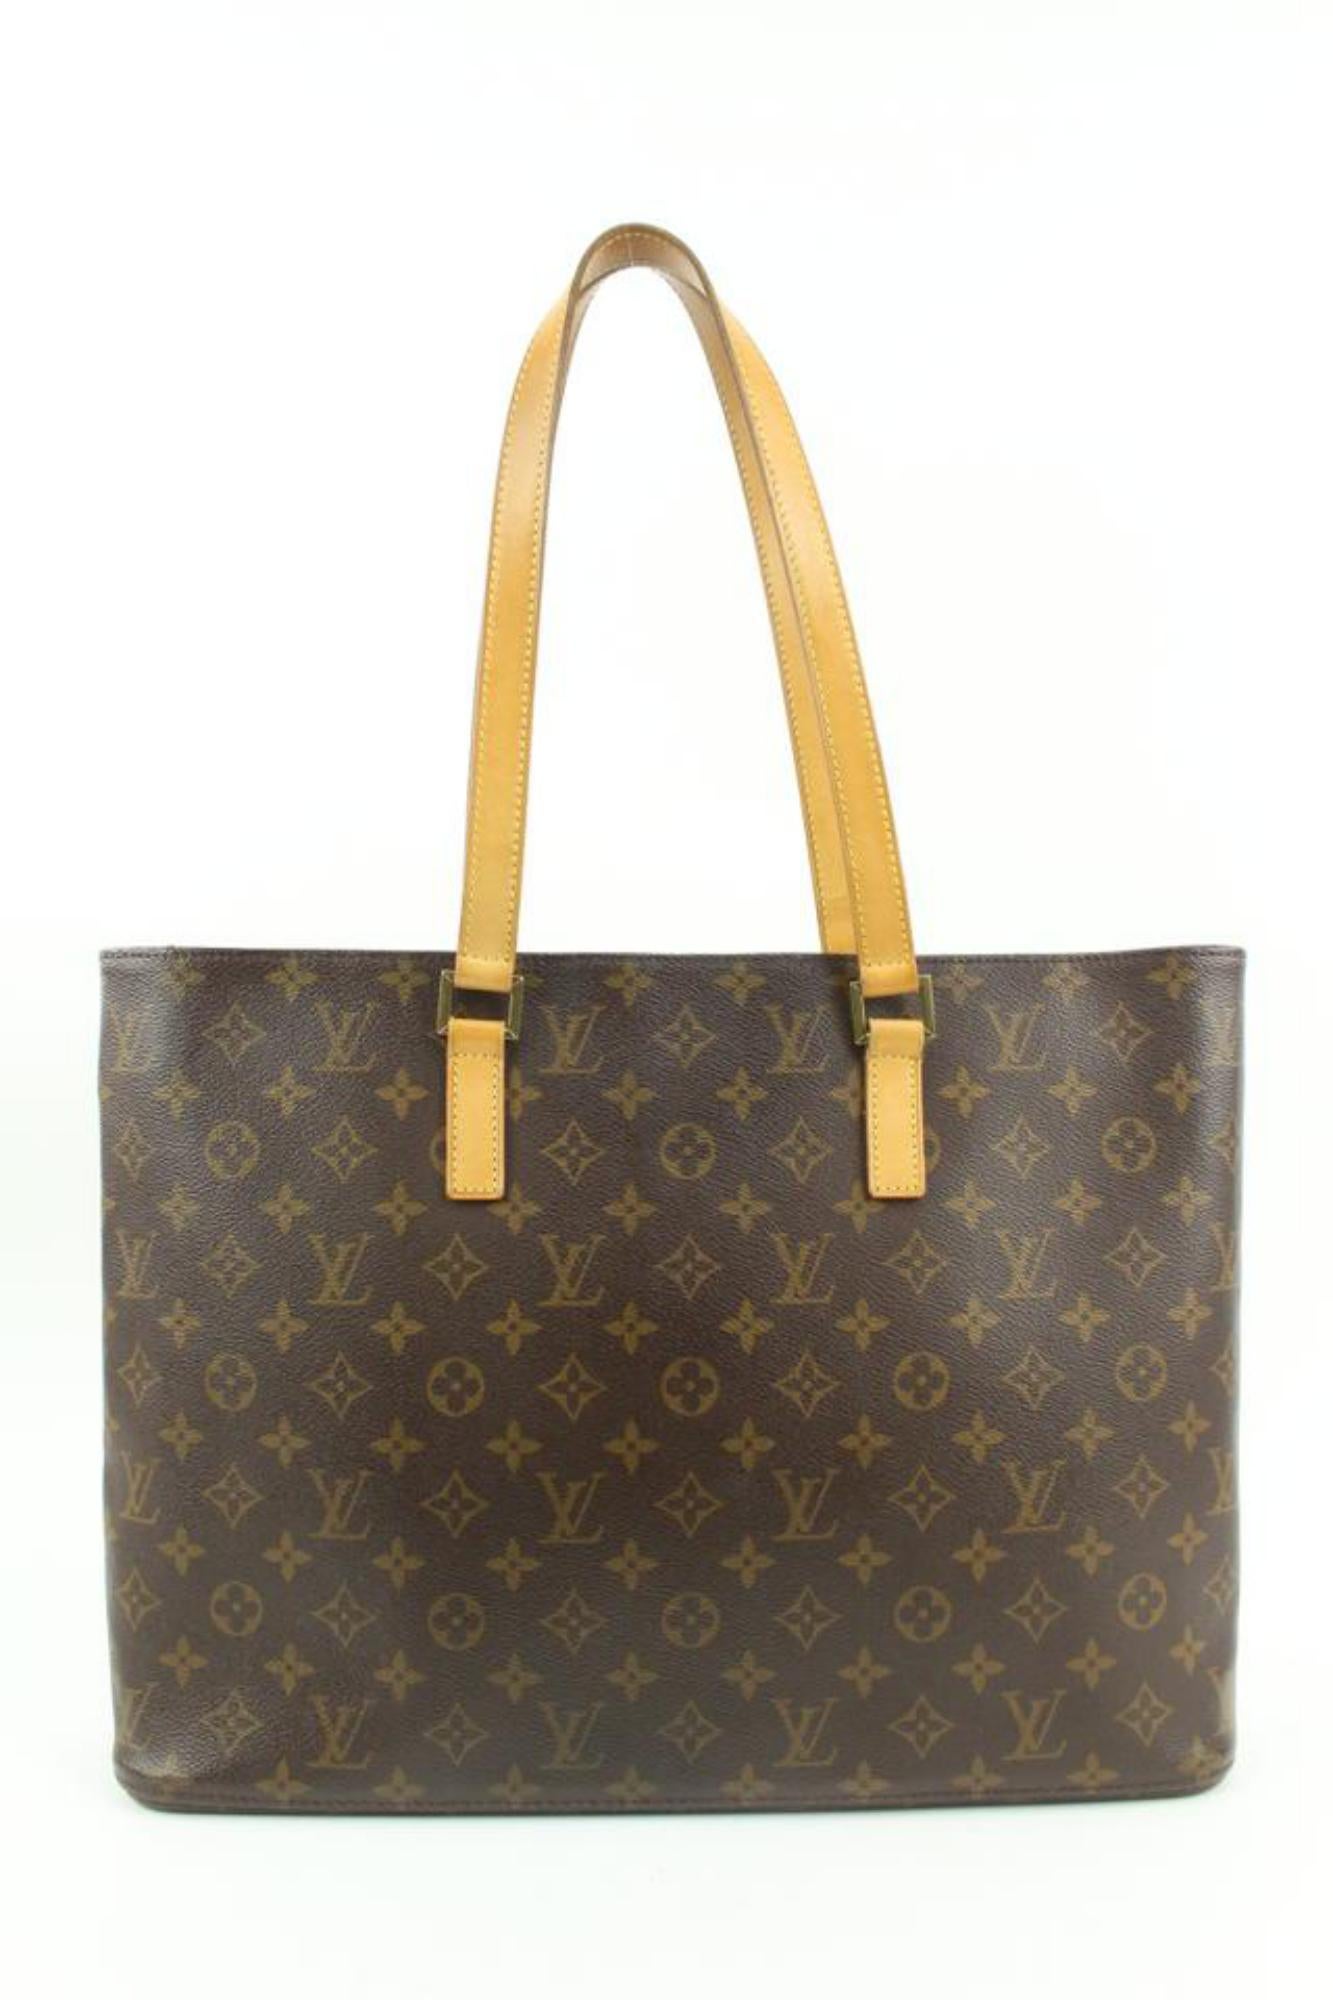 Louis Vuitton Monogram Luco Zip Tote Shoulder Bag 83lv225s In Good Condition For Sale In Dix hills, NY